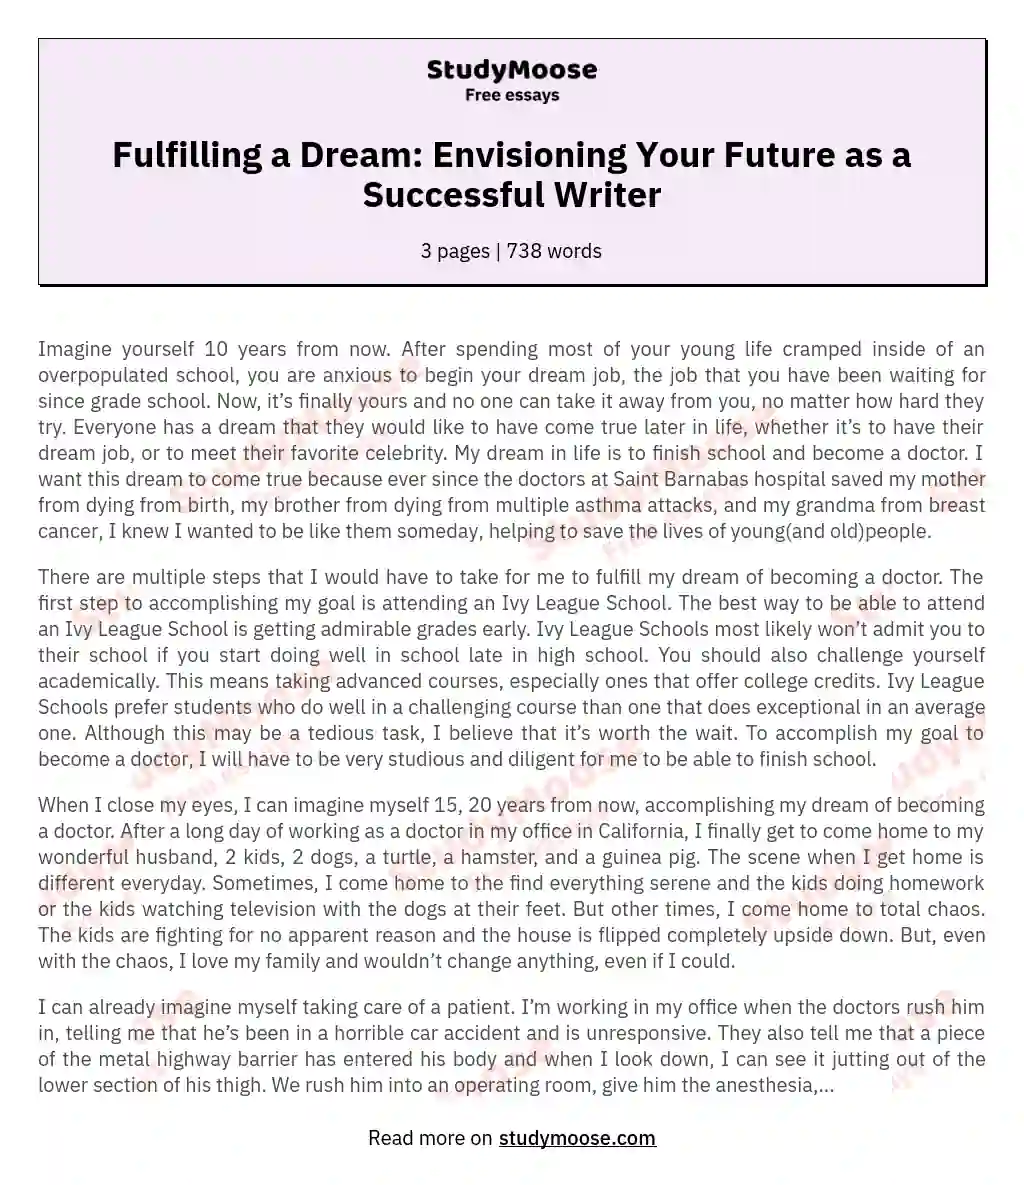 essay on my dreams for the future